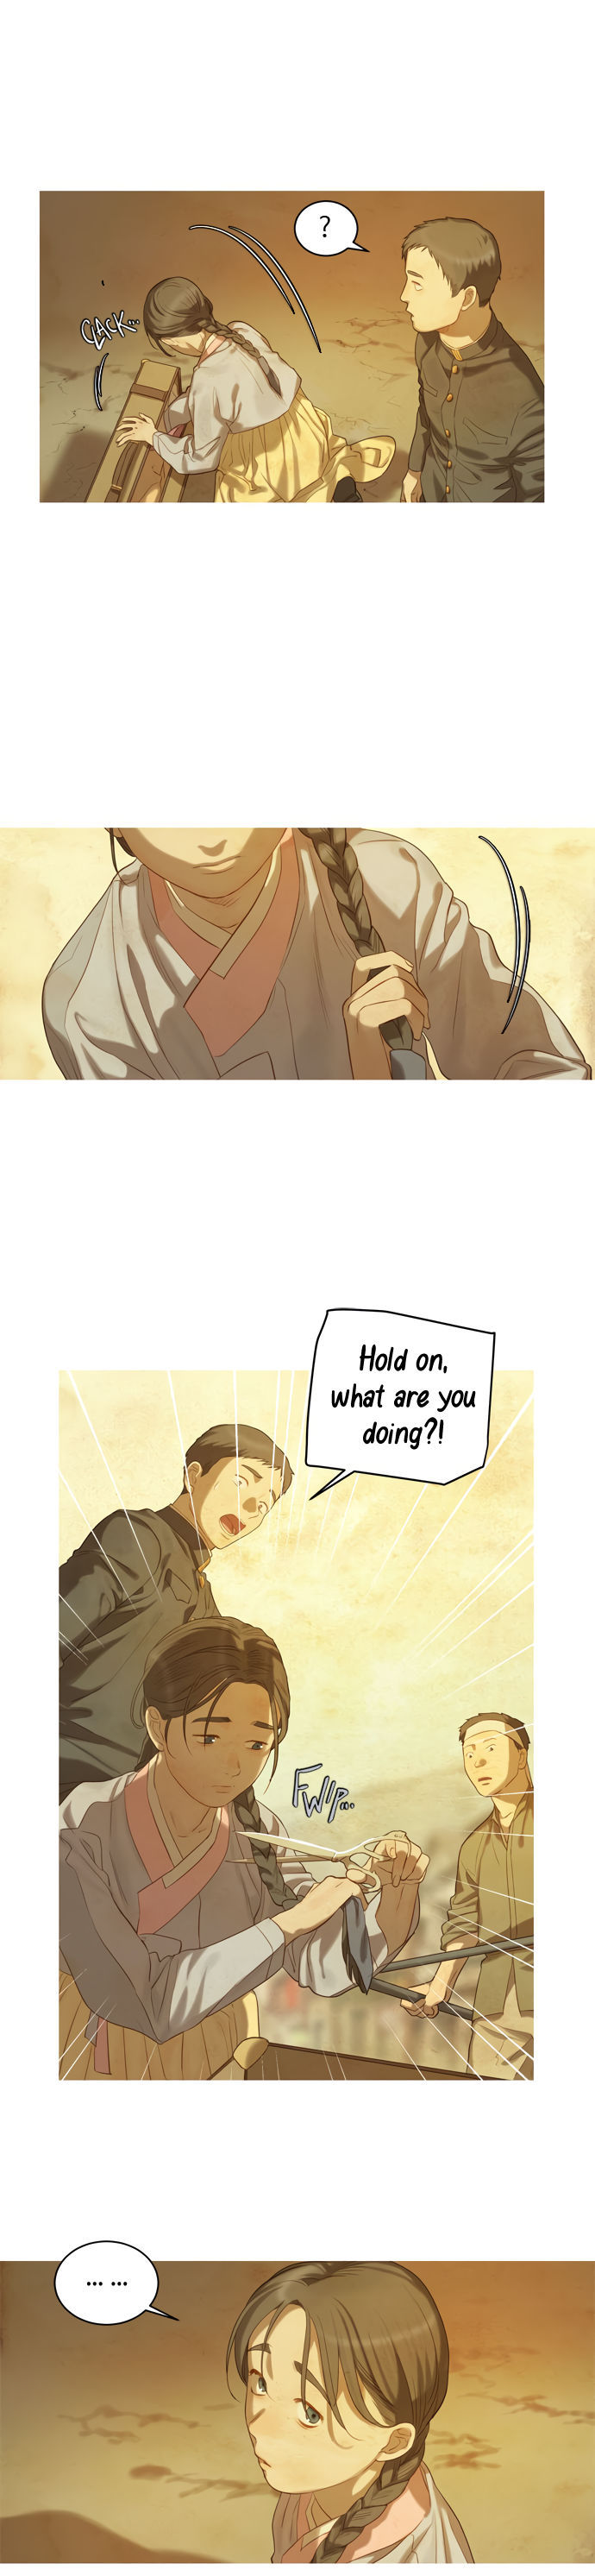 Gorae Byul - The Gyeongseong Mermaid - Chapter 17 Page 13